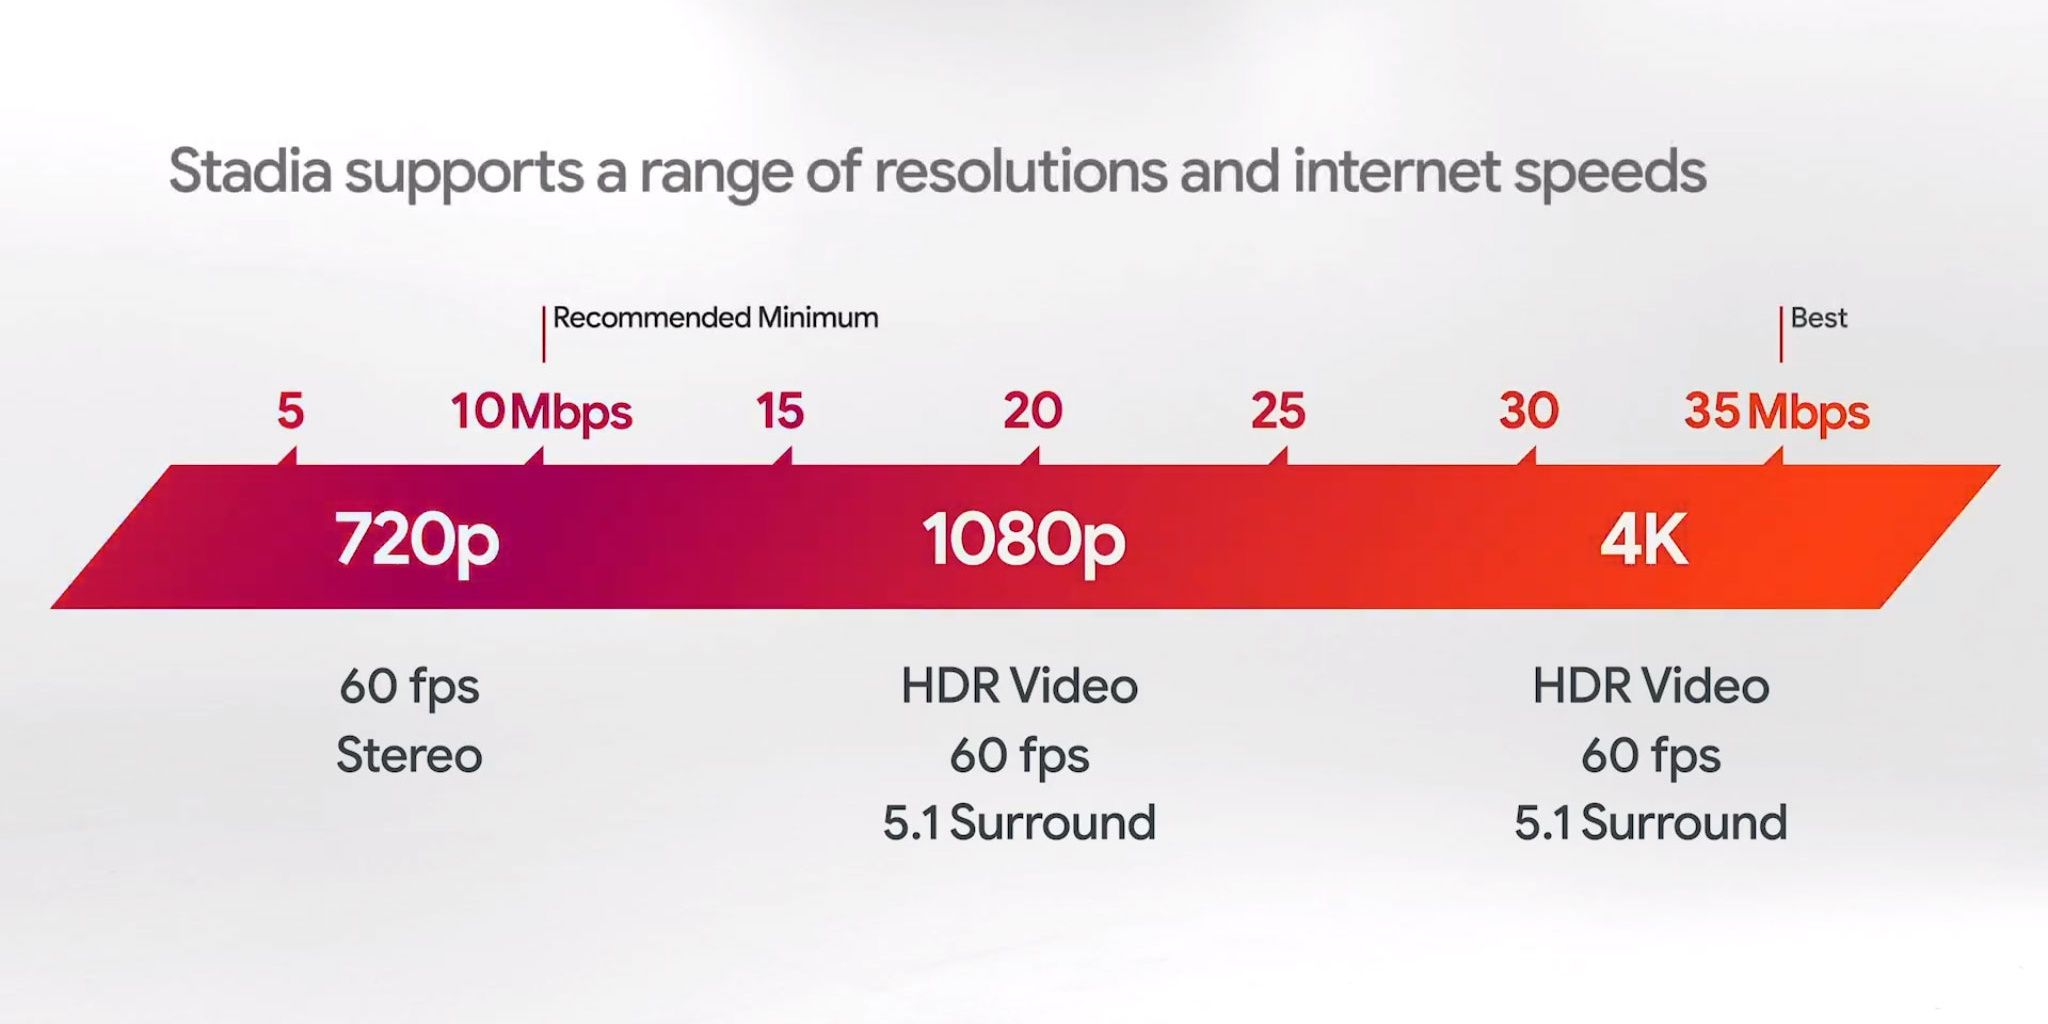 Stadia's supported range of internet speed and resolutions